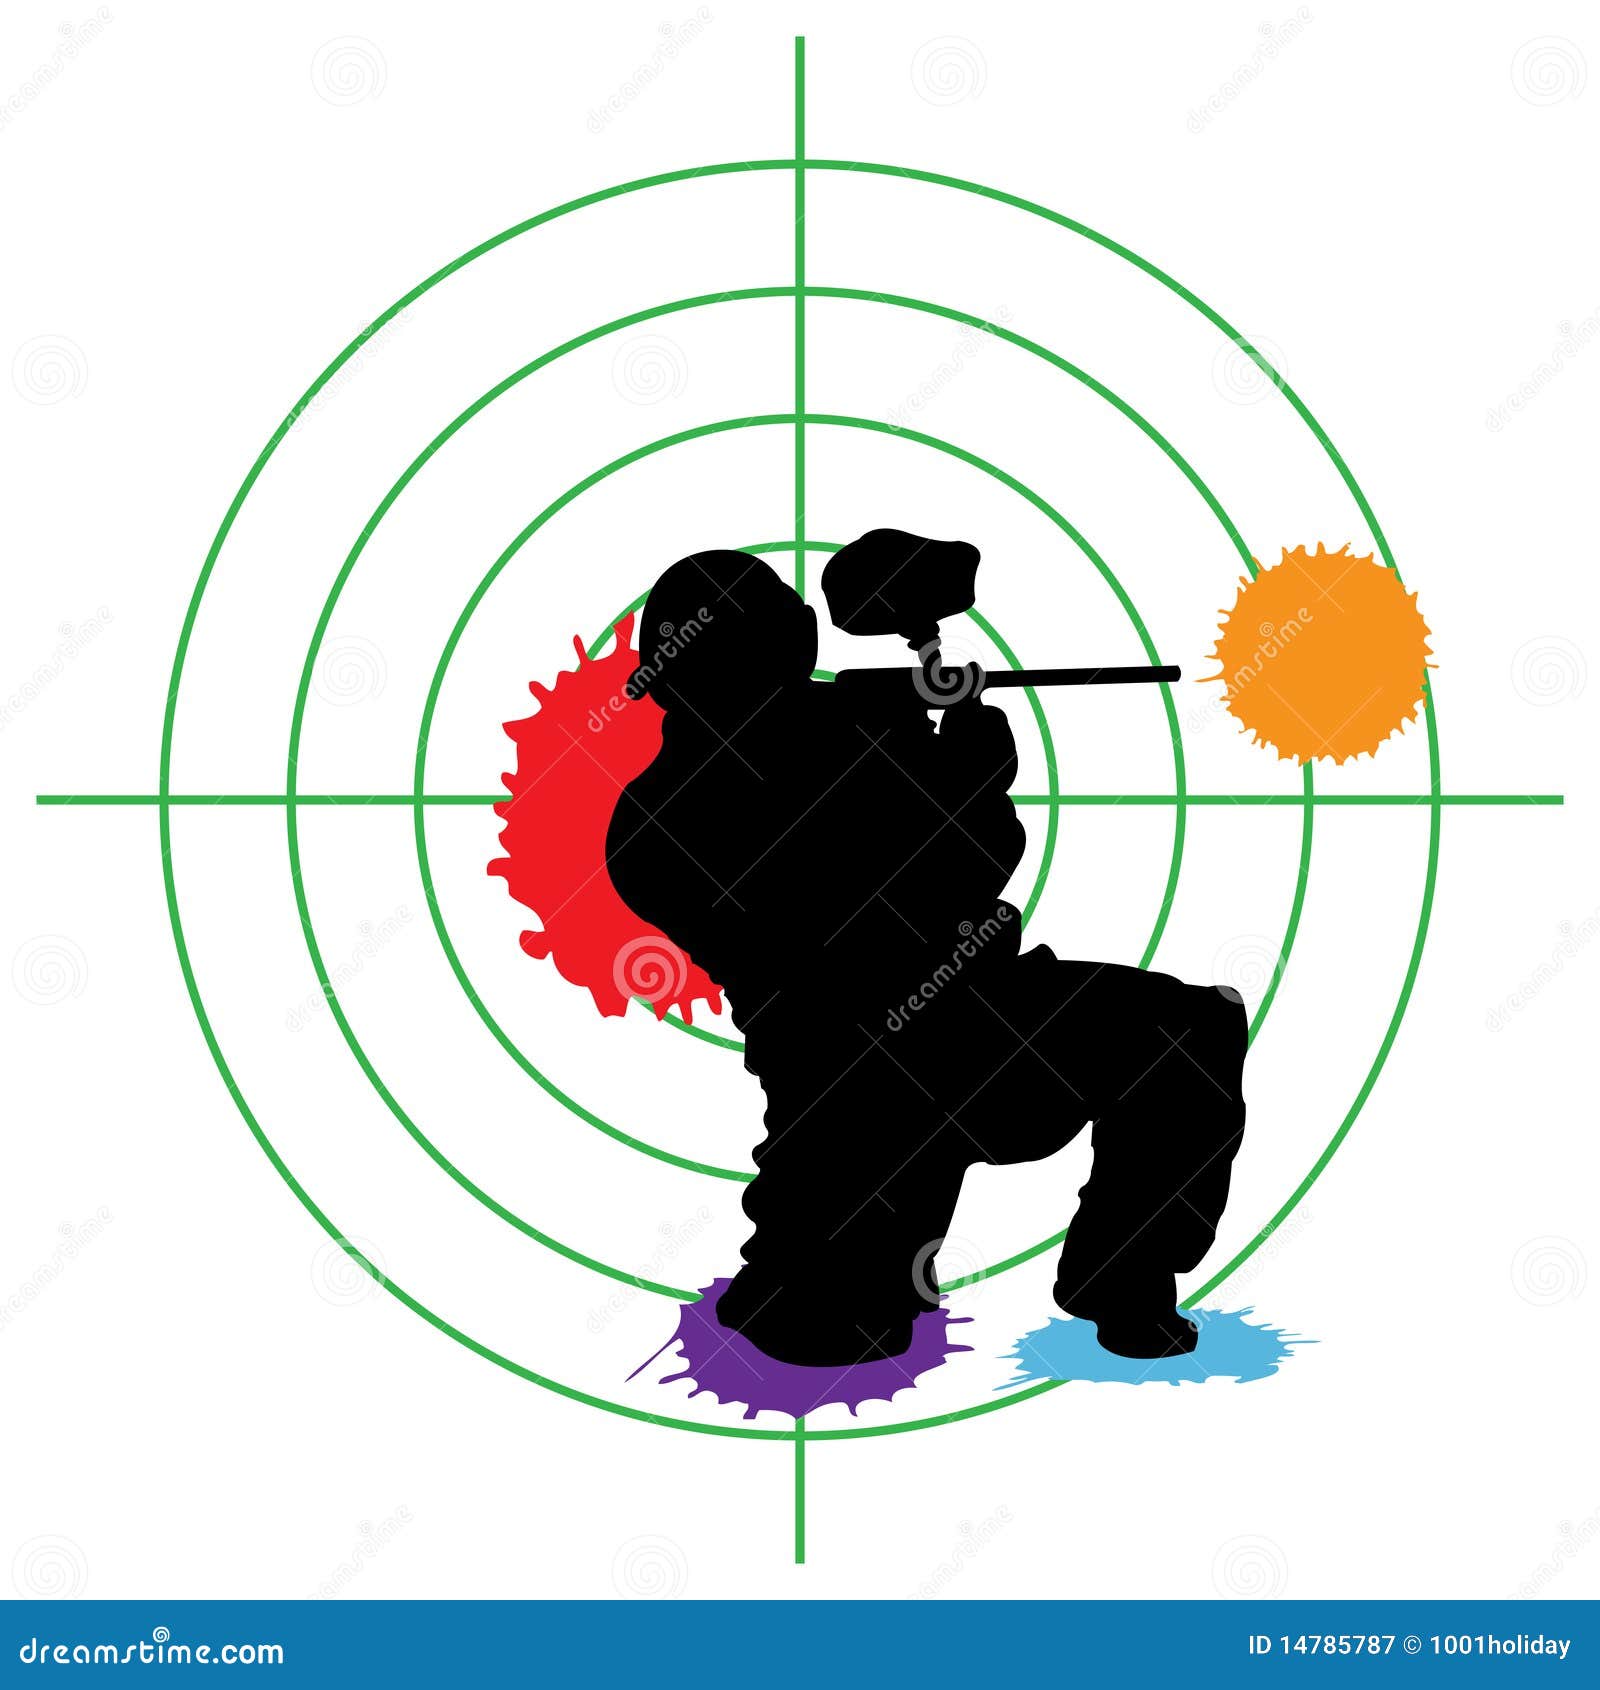 Paintball Target Royalty Free Stock Photography - Image: 14785787